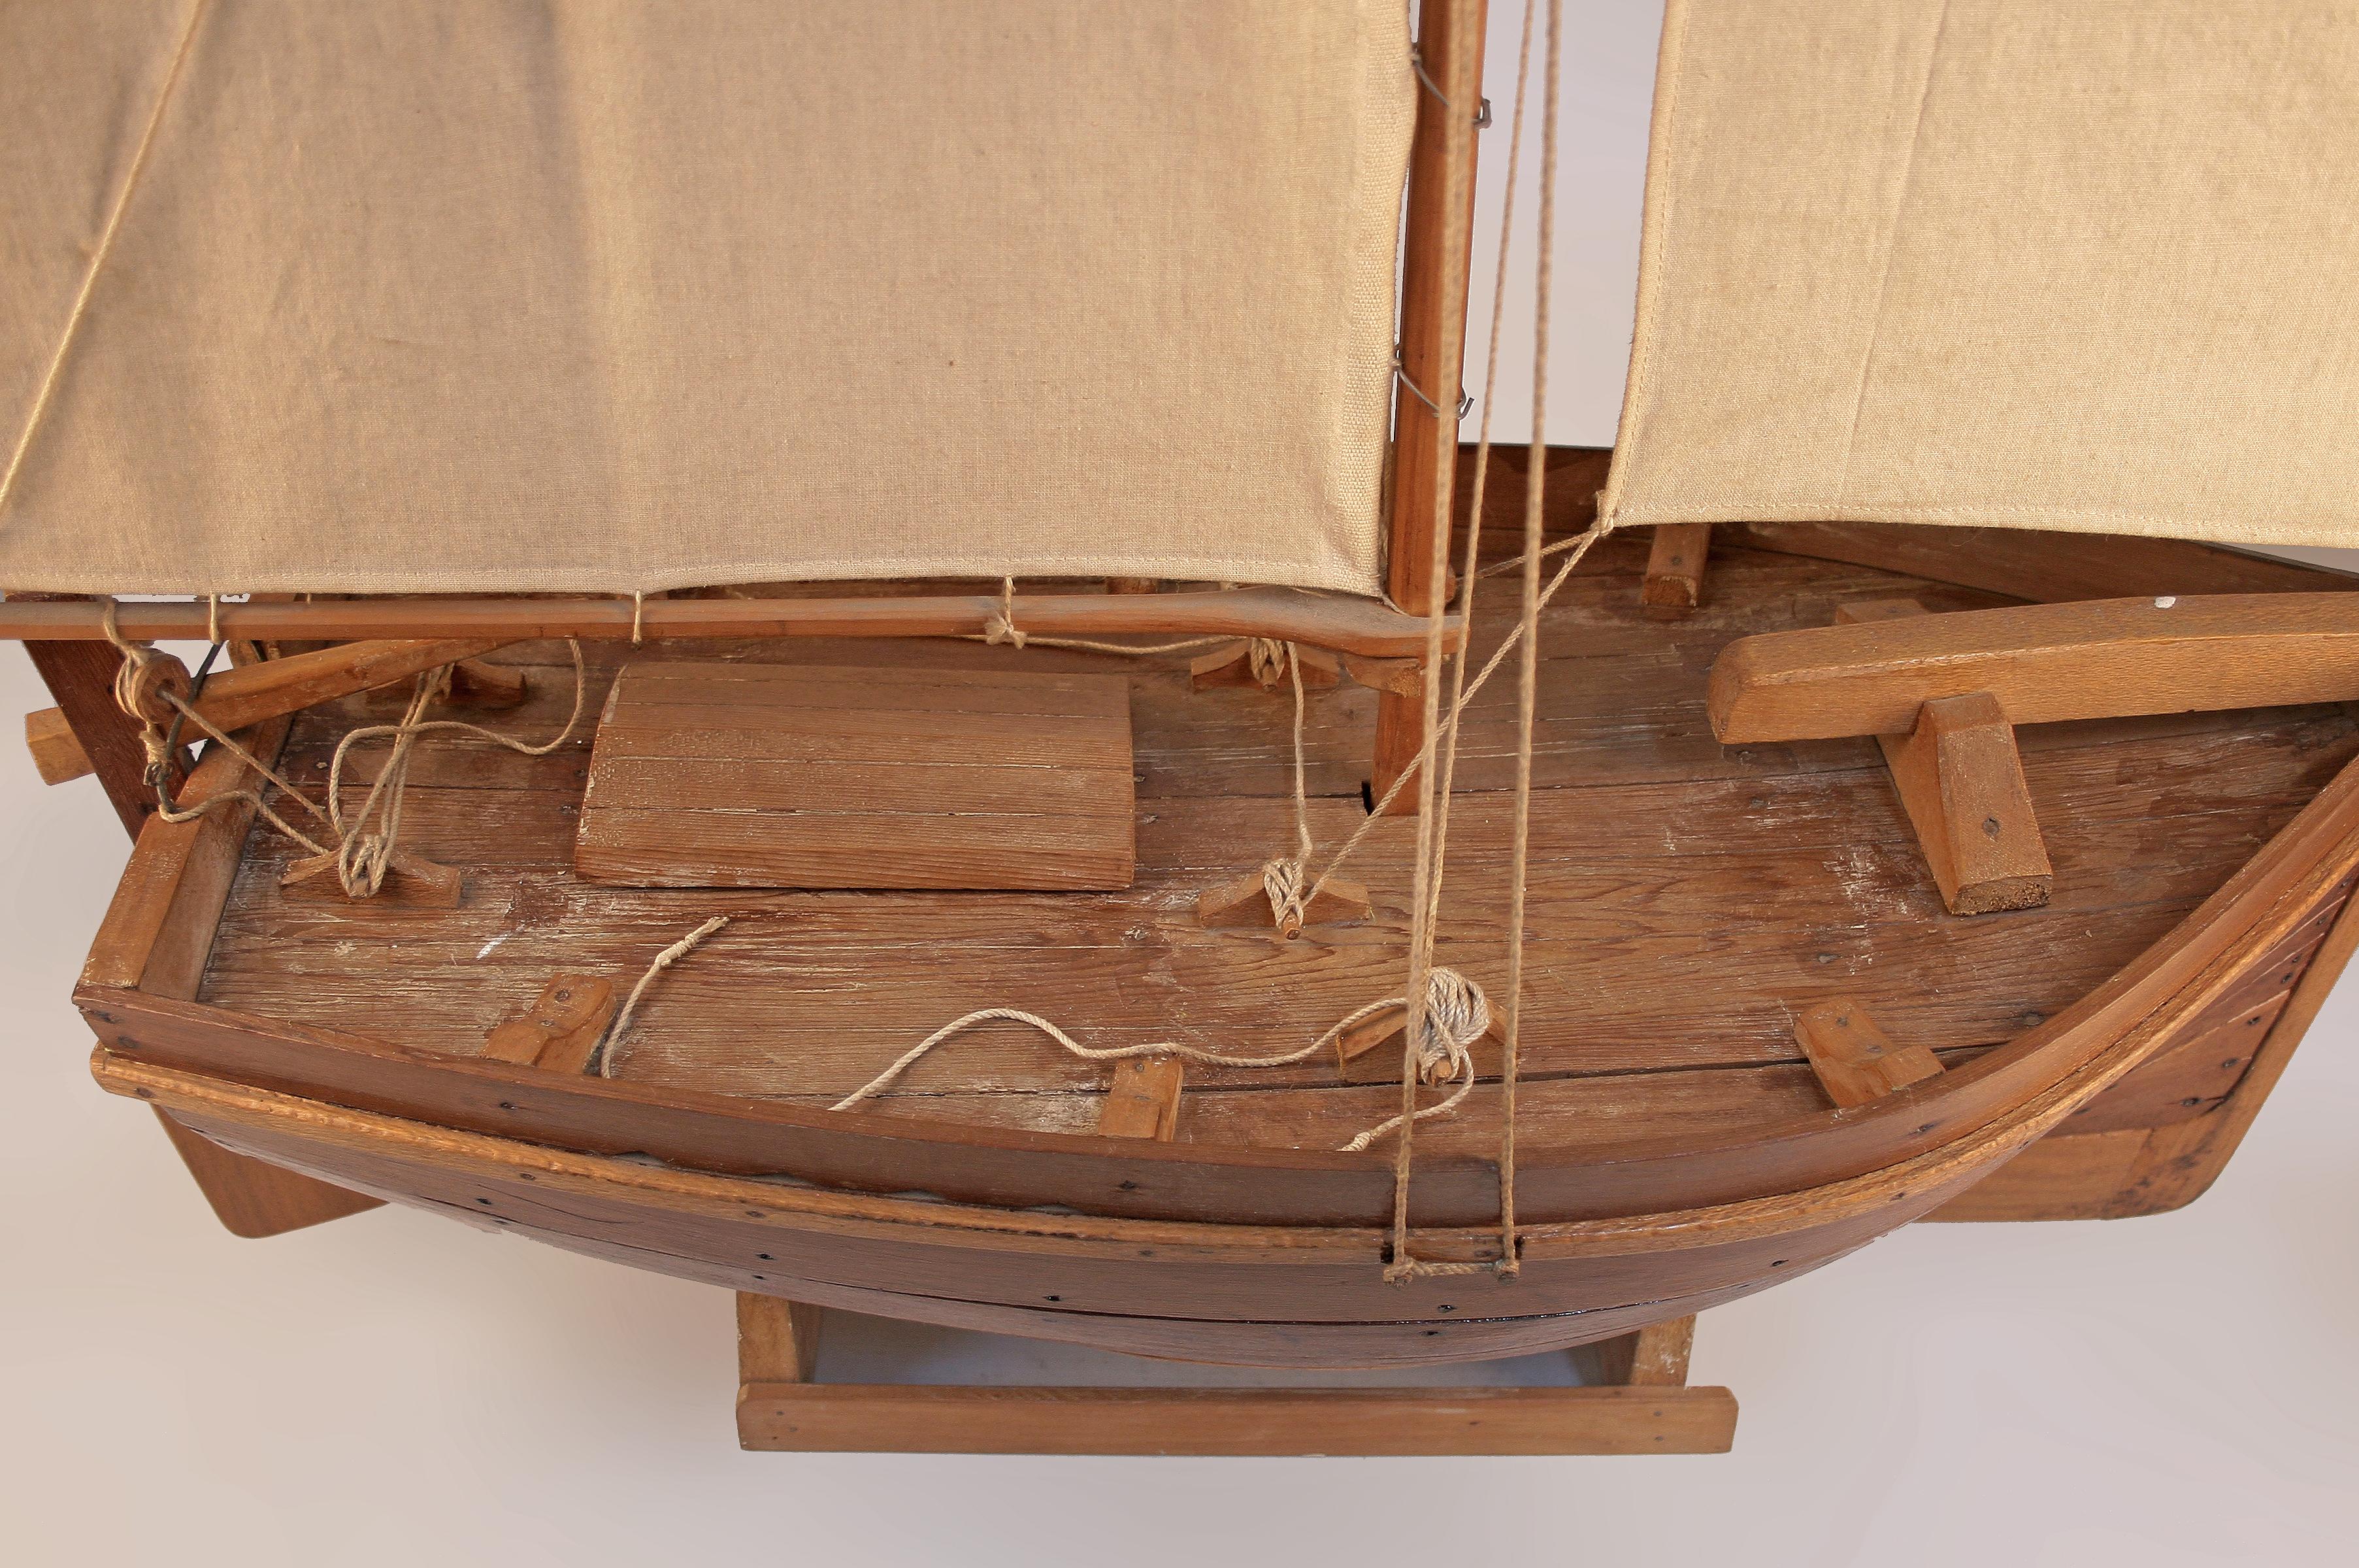 Hand-Crafted Mid-20th C. Wood Model of Antique Fishing Boat Ship With Sails Made in Argentina For Sale